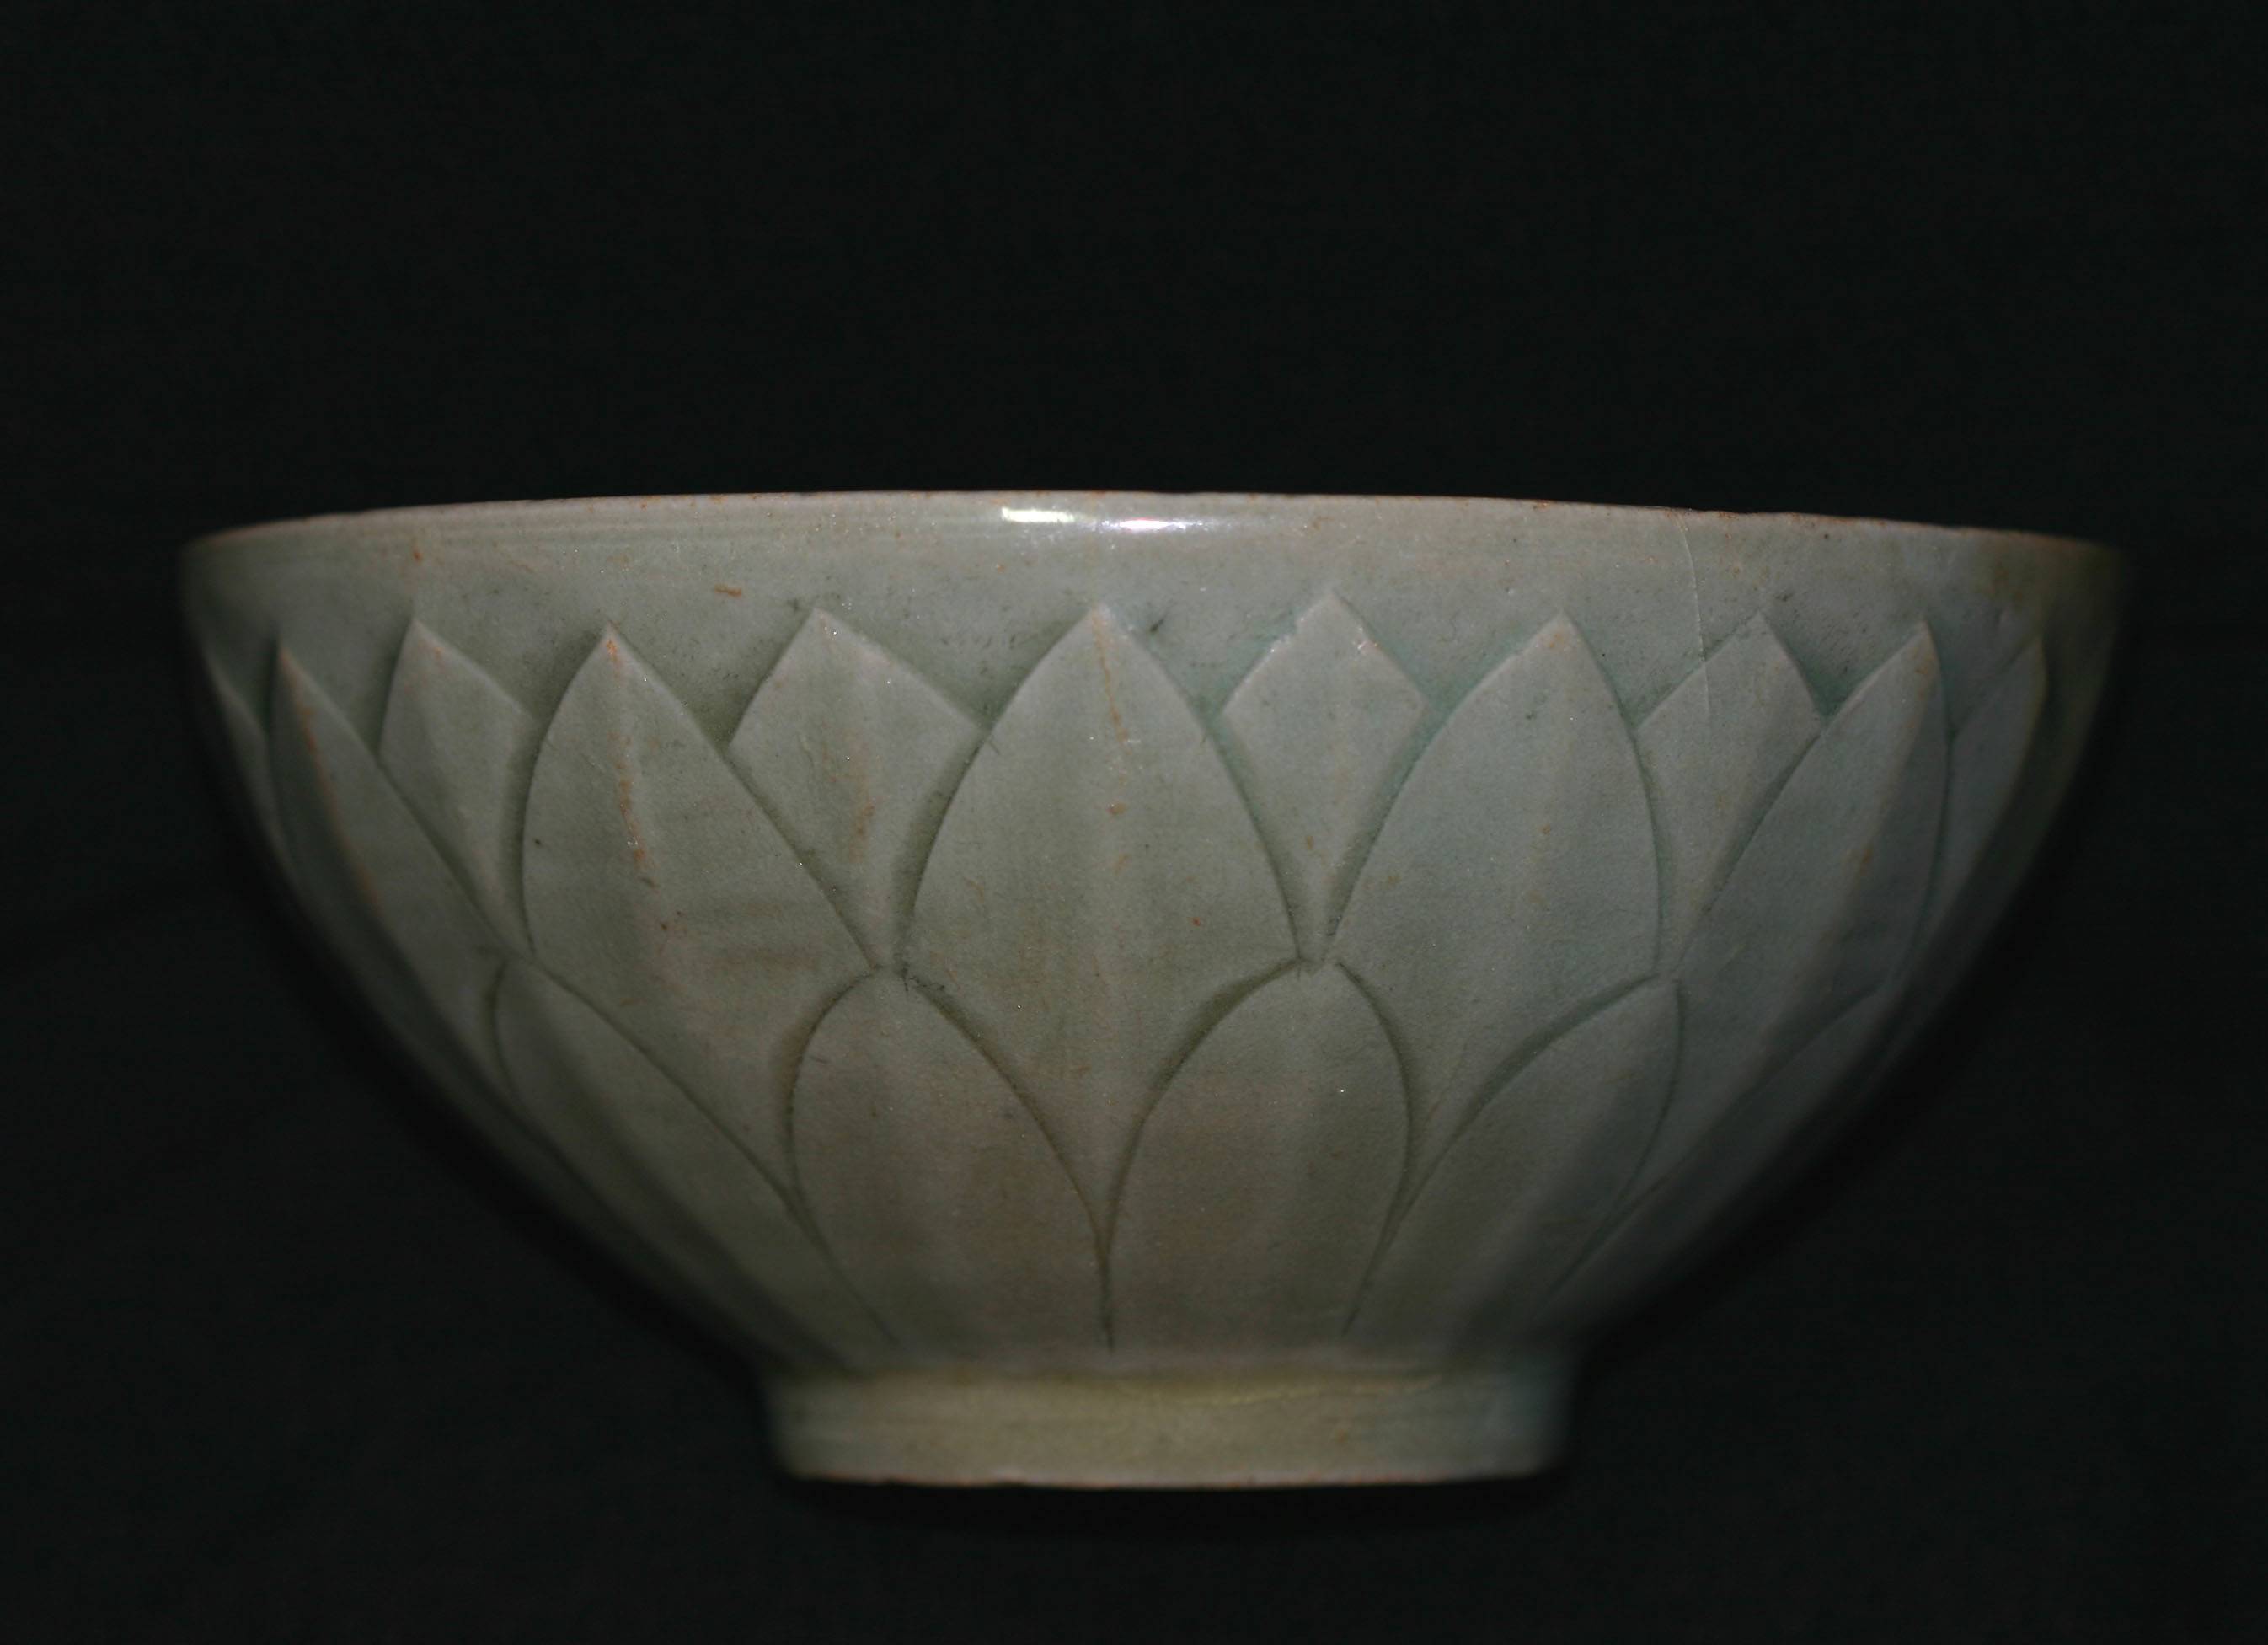 Lotus Celedon Bowl - Very Old Chinese or Possibly Korean